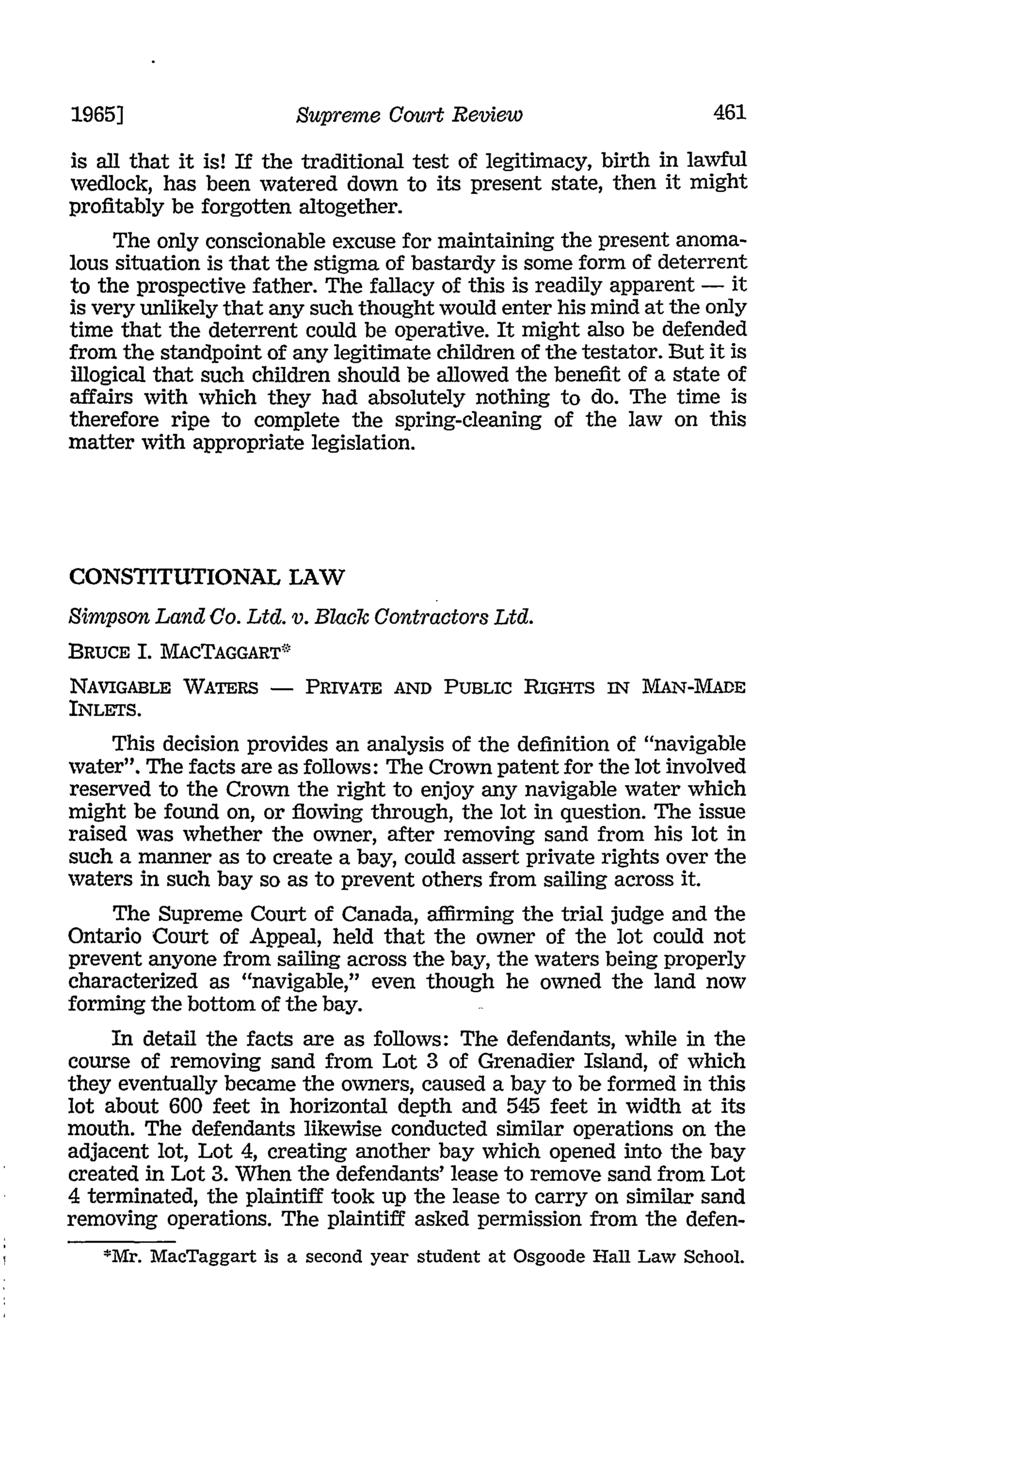 CONSTITUTIONAL LAW Simpson Land Co. Ltd. v. Black Contractors Ltd. BRUCE I. MACTAGGART ' NAVIGABLE WATERS - INLETS.